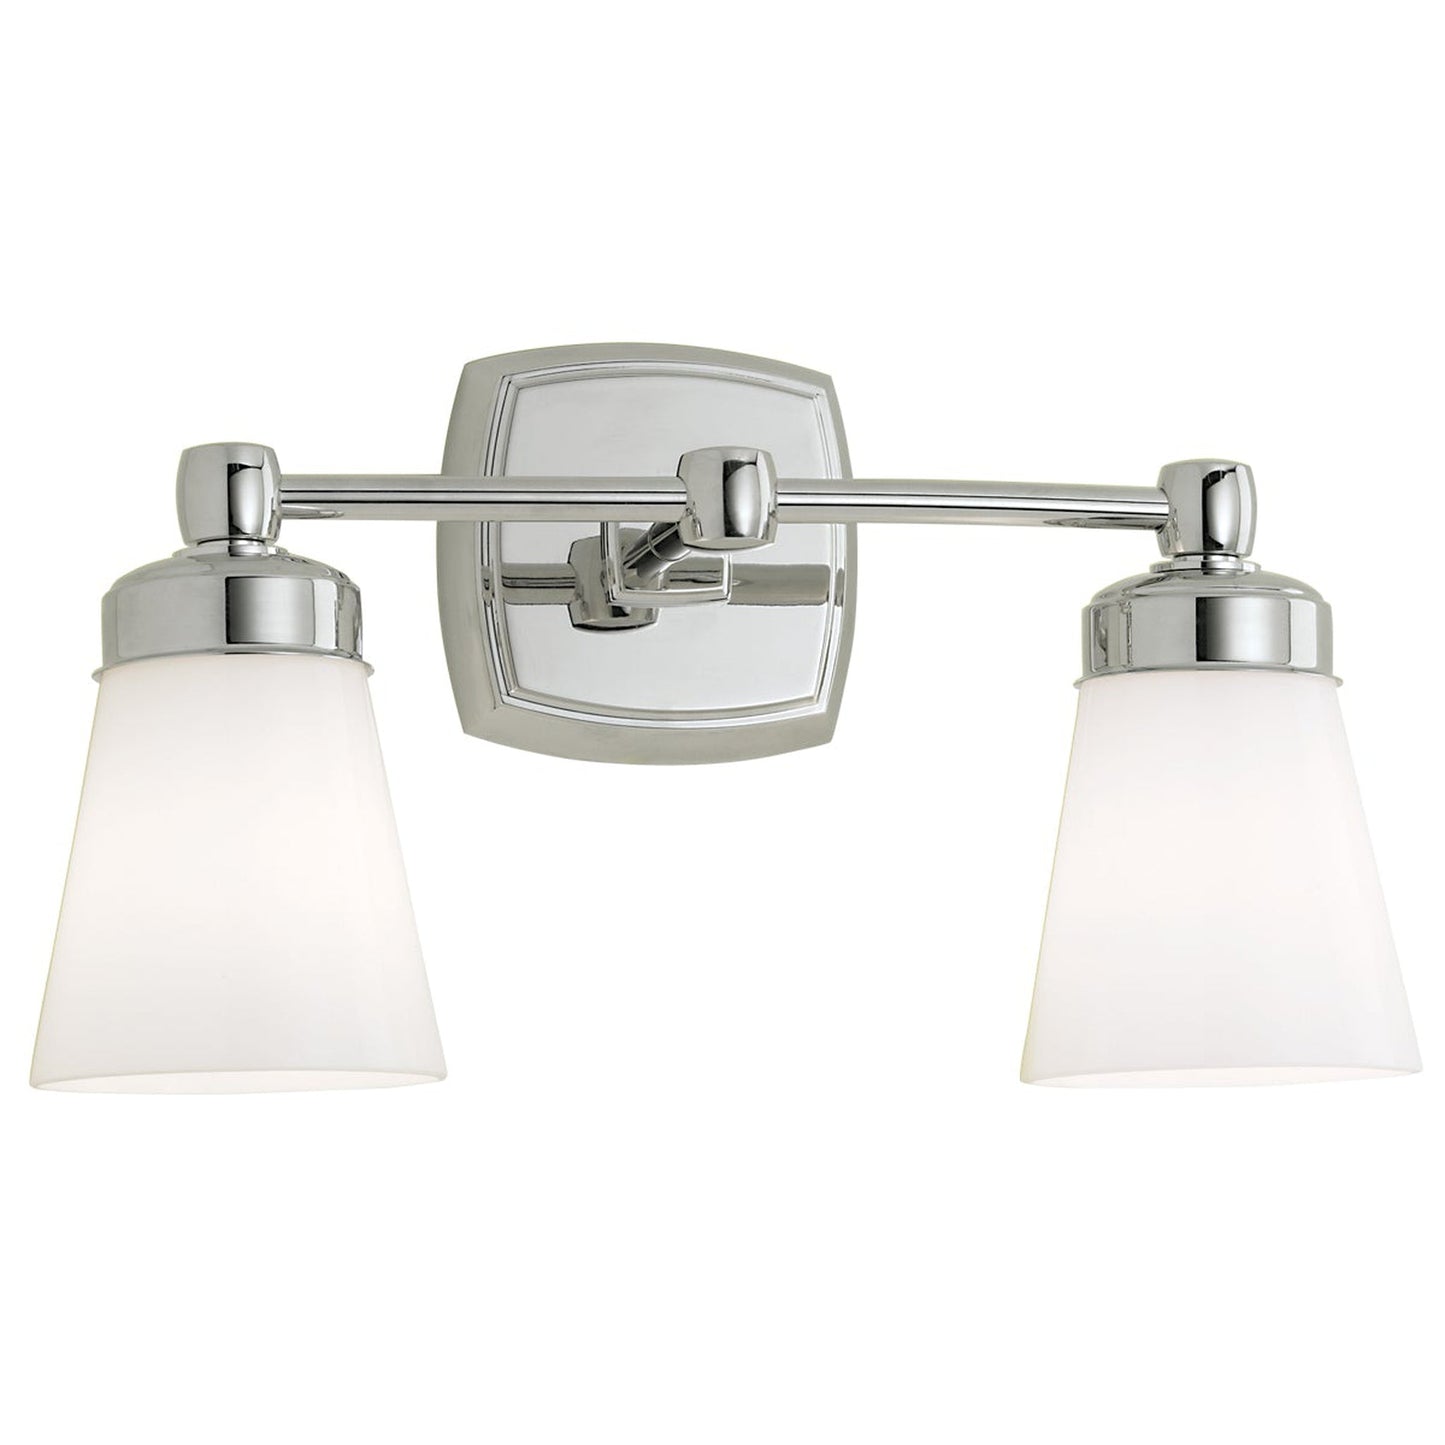 Norwell Lighting Soft Square 9" x 16" 2-Light Sconce Chrome Vanity Light With Shiny Opal Glass Diffuser